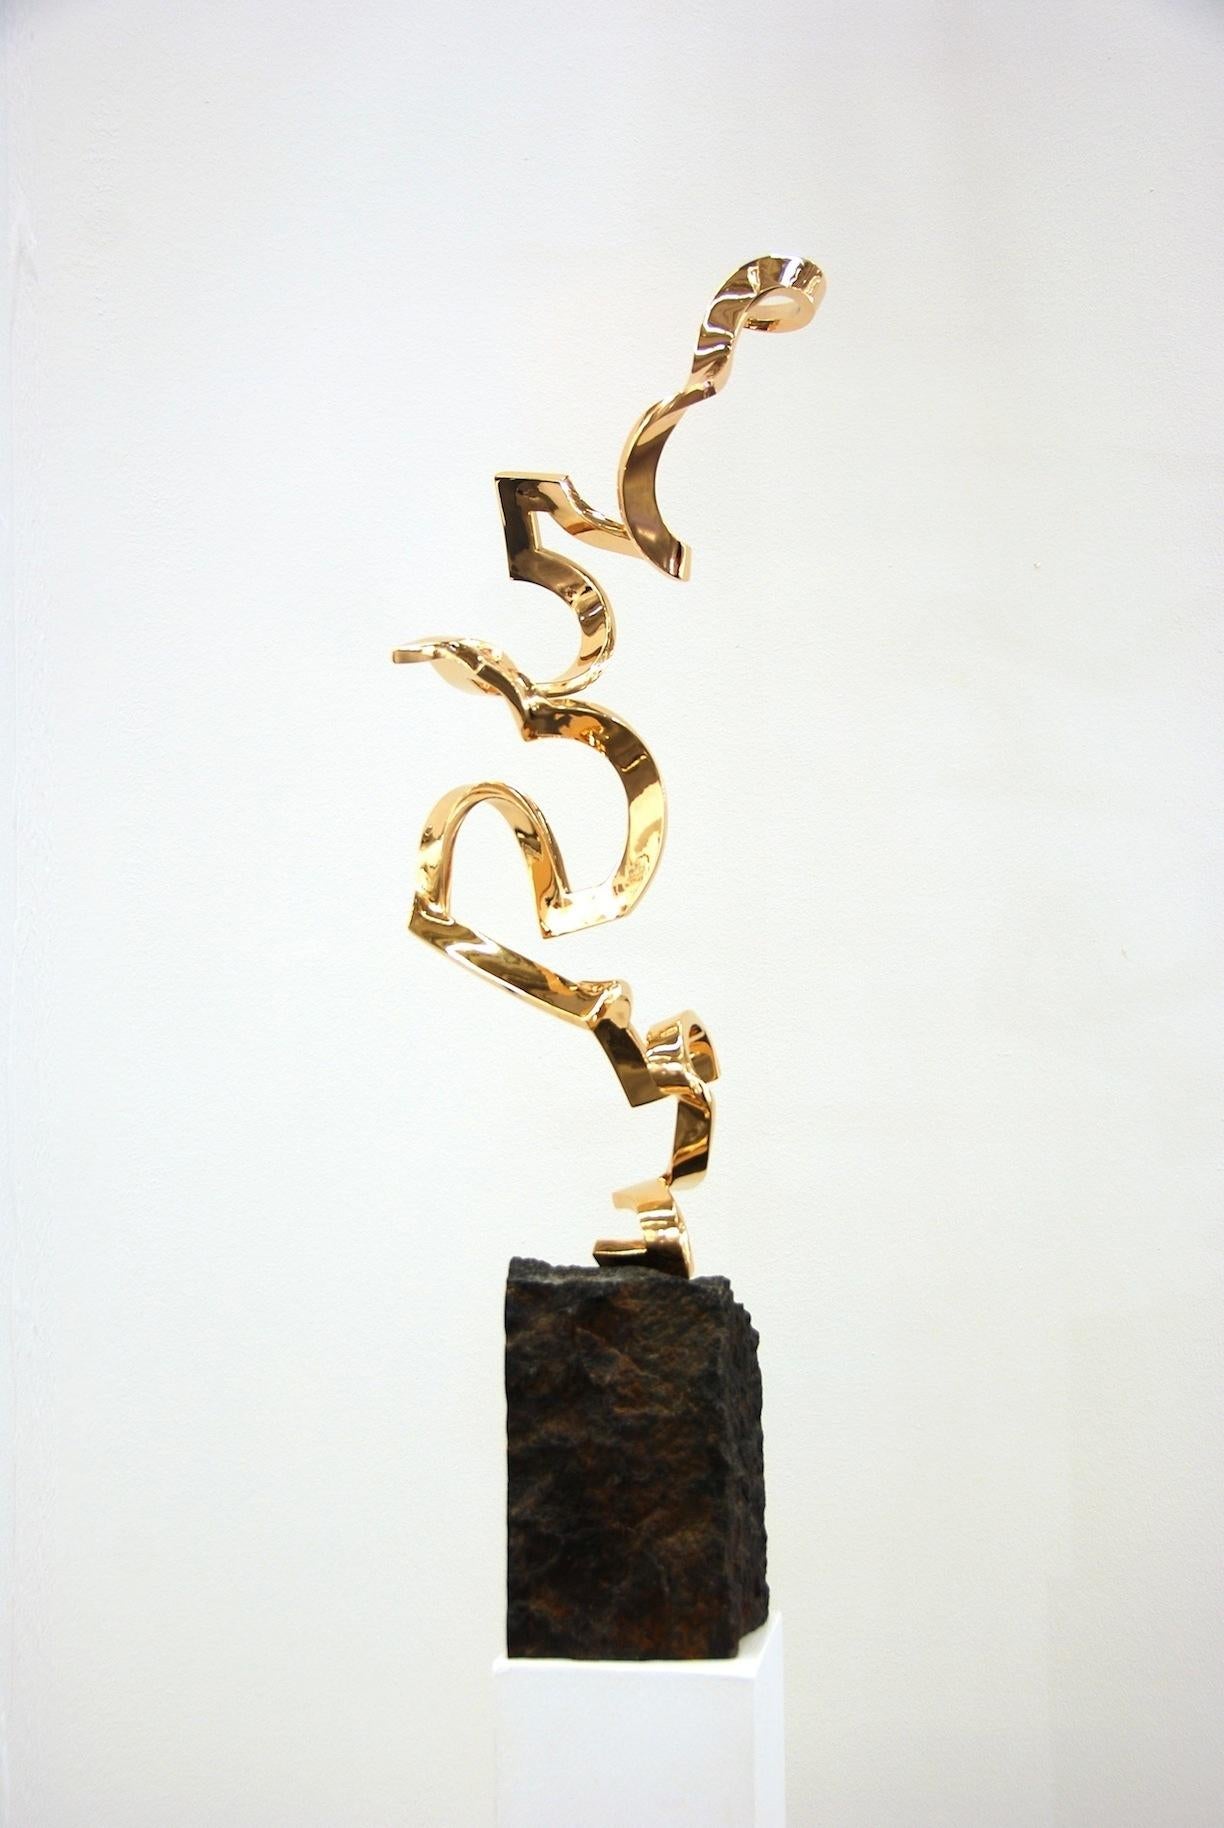 Artist: Kuno Vollet

Title: Light as Air

Materials: Bronze sculpture polished to a sparkling gold on granite base

Size: 65cm height of upper sculpture, base: 18x 18 cm